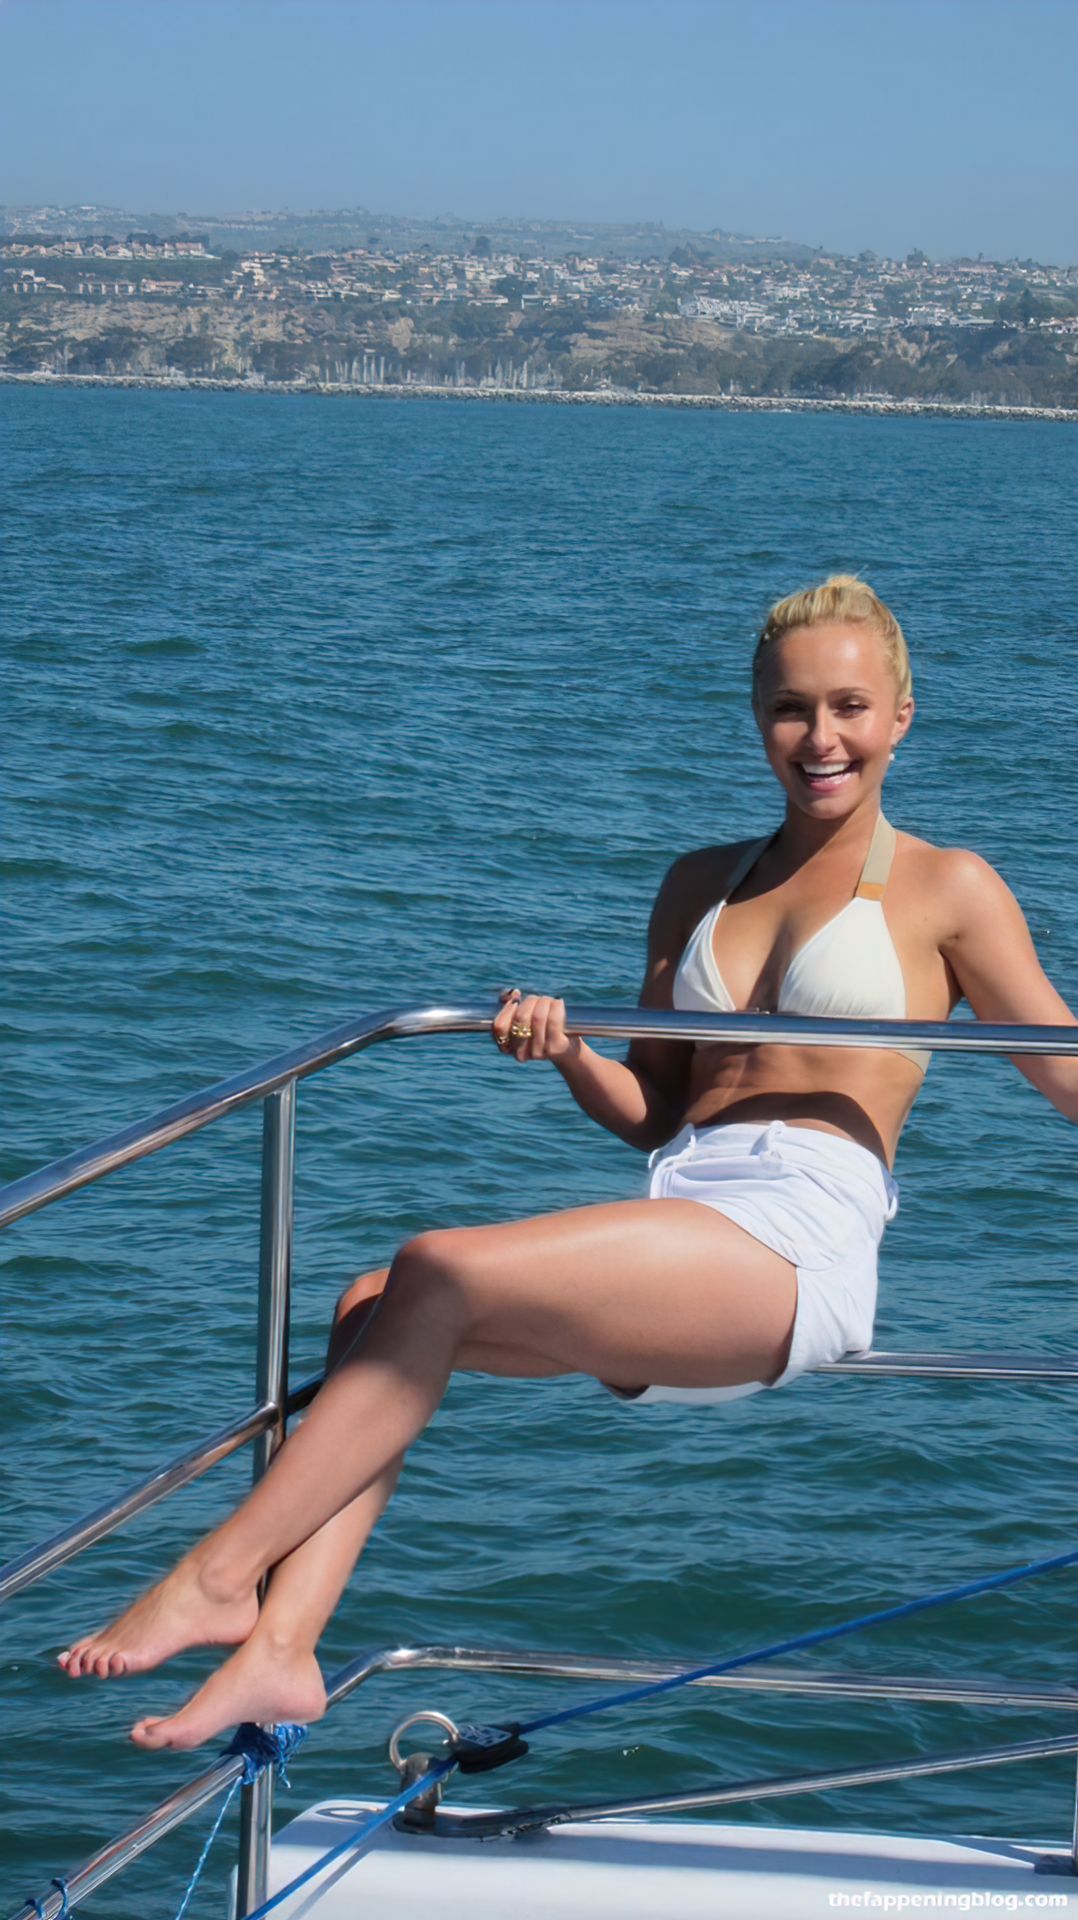 Hayden Panettiere Nude LEAKED The Fappening  Sexy (156 Photos + Possible Porn Video)